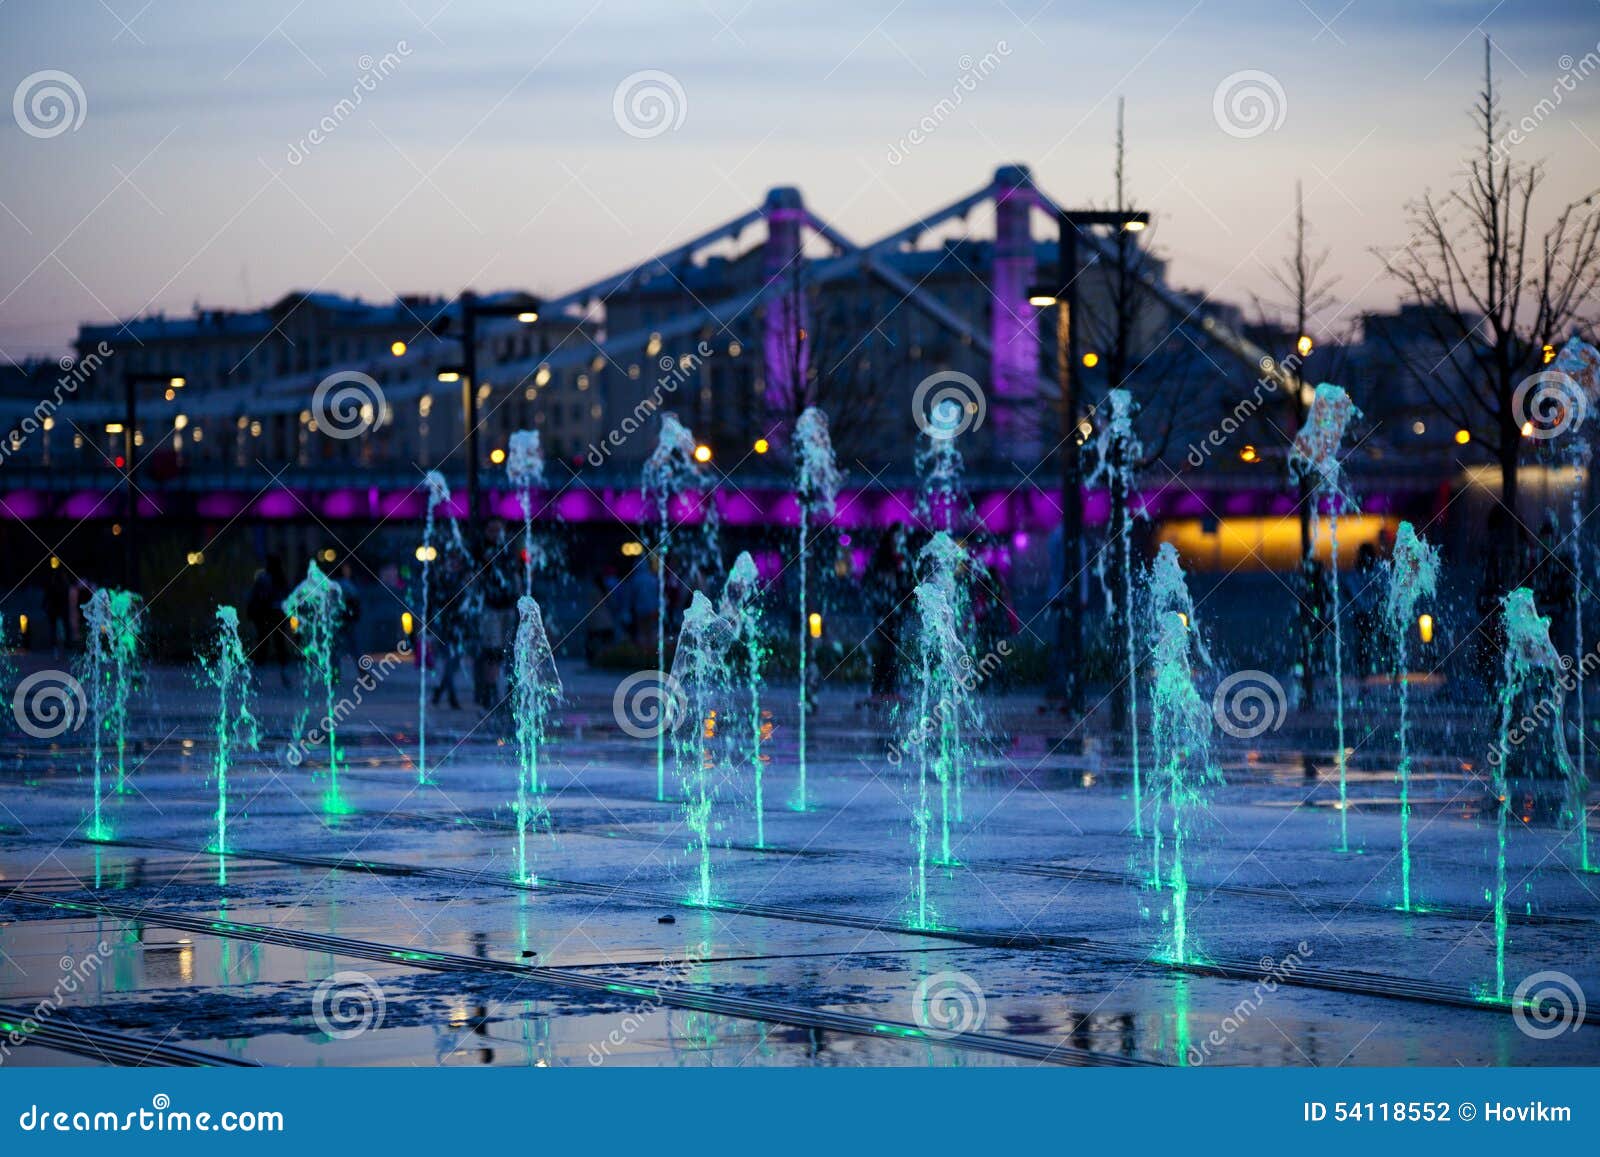 krymsky bridge or crimean bridge in moscow, russia. in th background of fauntains.